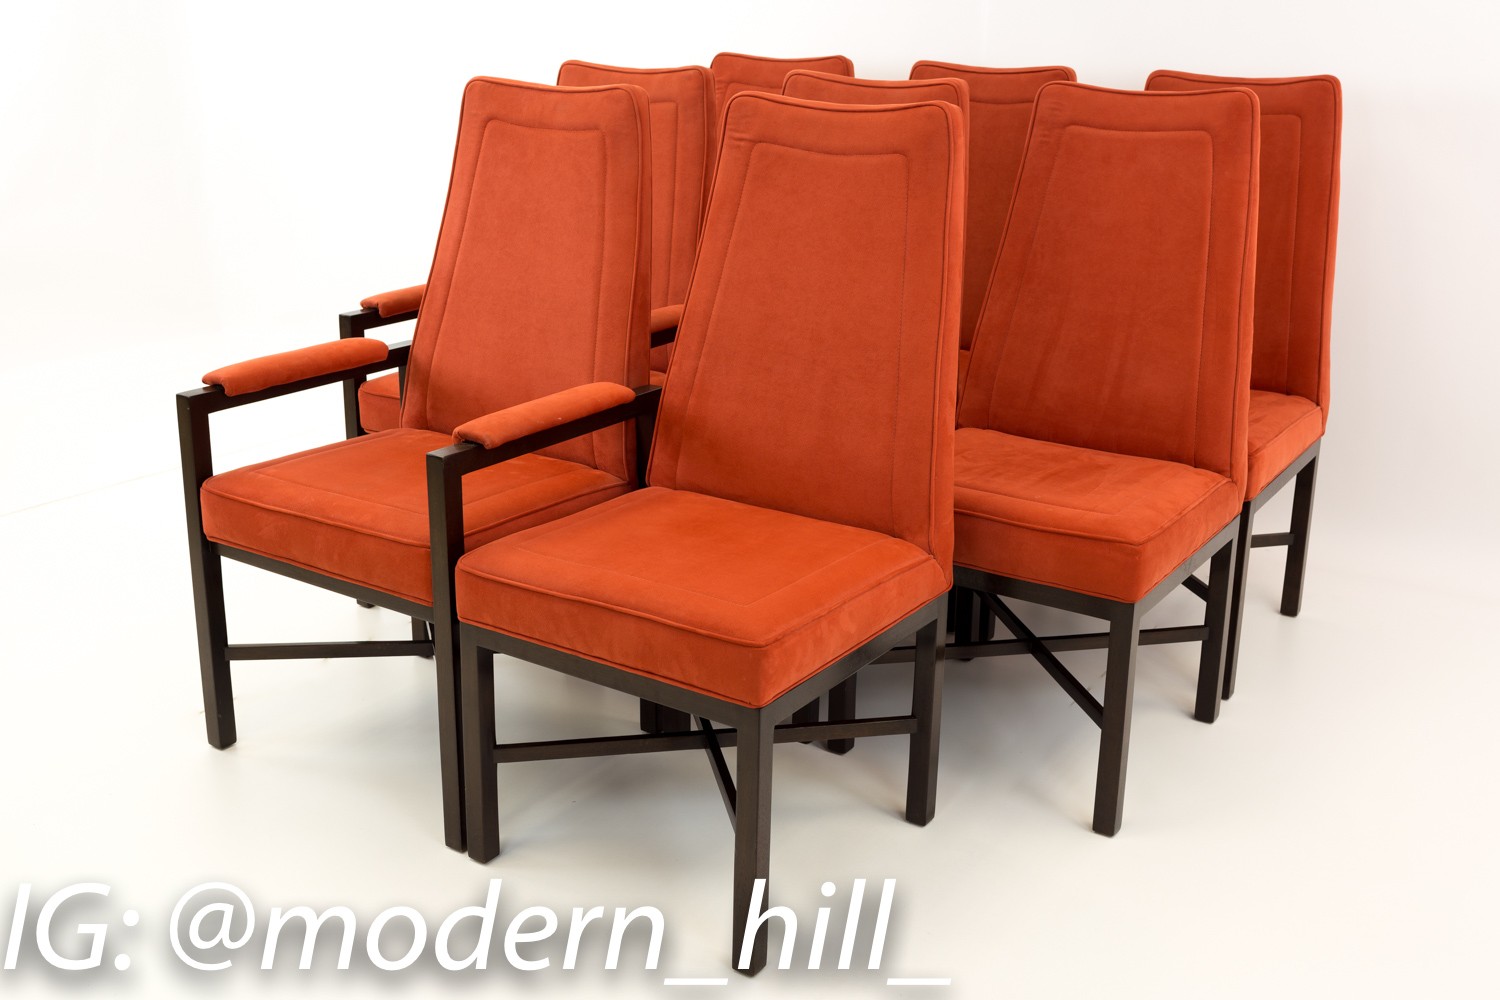 Edward Wormley for Dunbar Mid Century Modern Dining Chairs - Set of 8